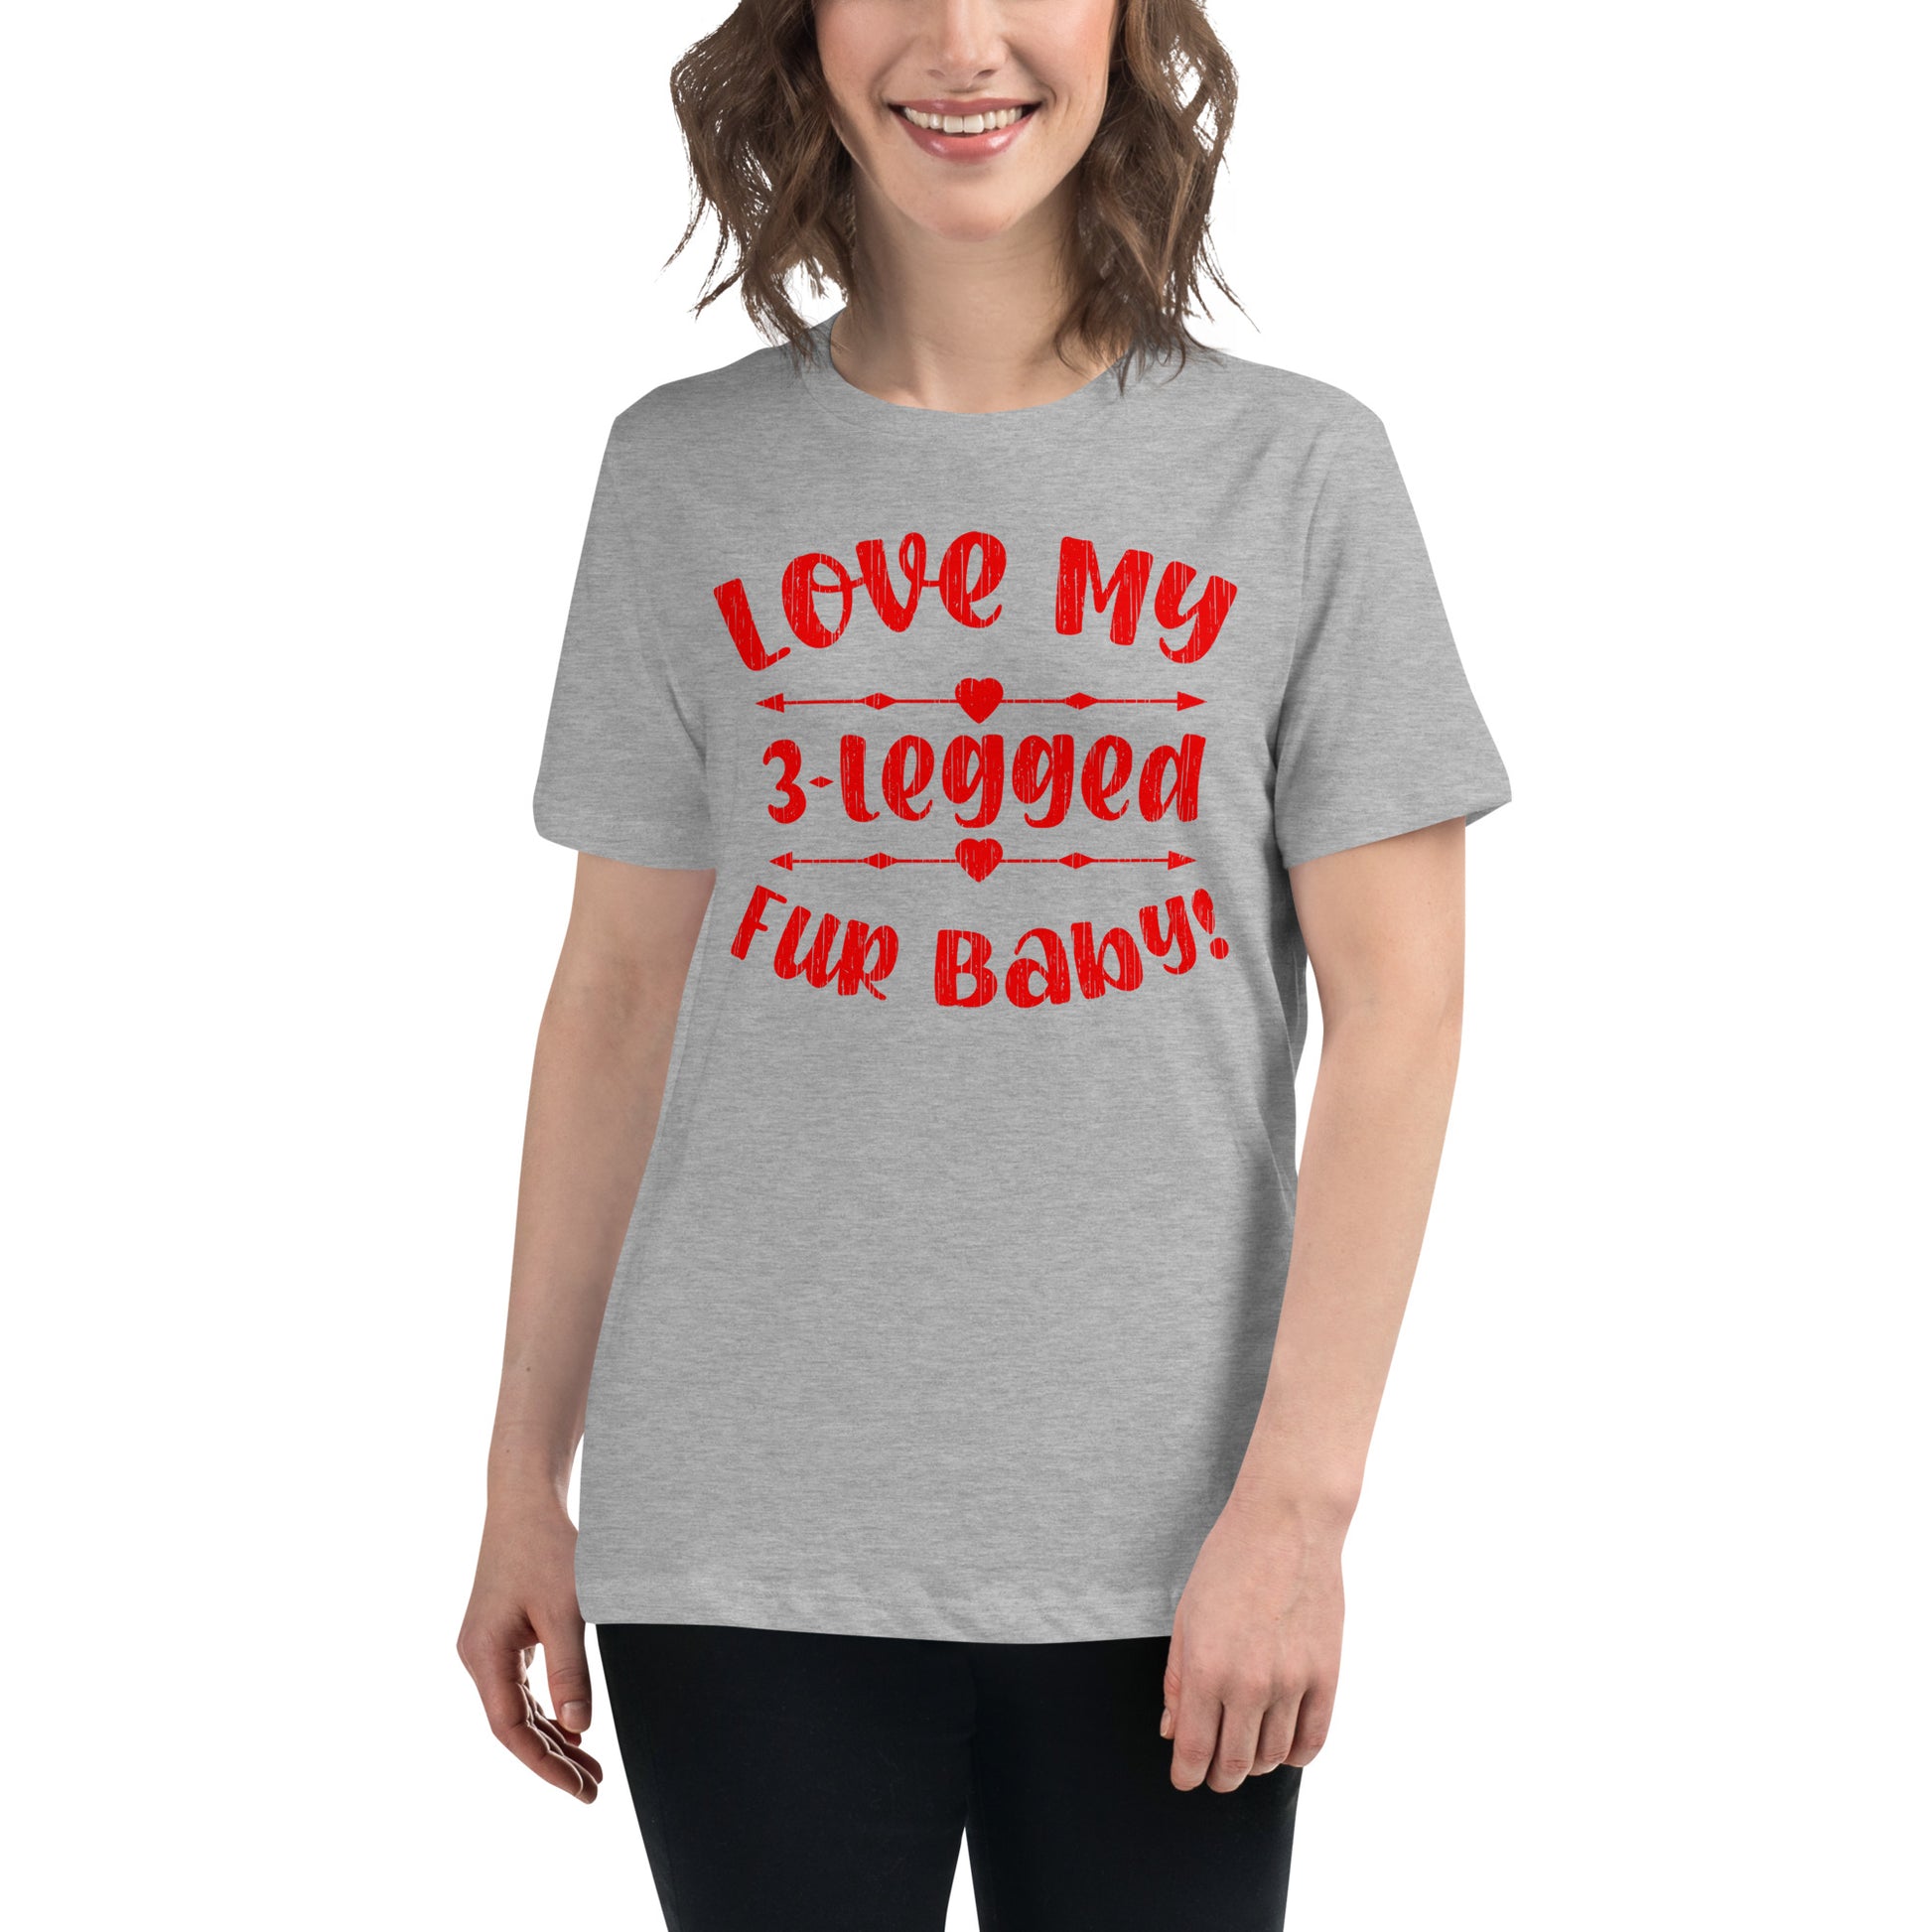 Love my 3-legged fur baby women’s relaxed fit t-shirts by Dog Artistry athletic heather